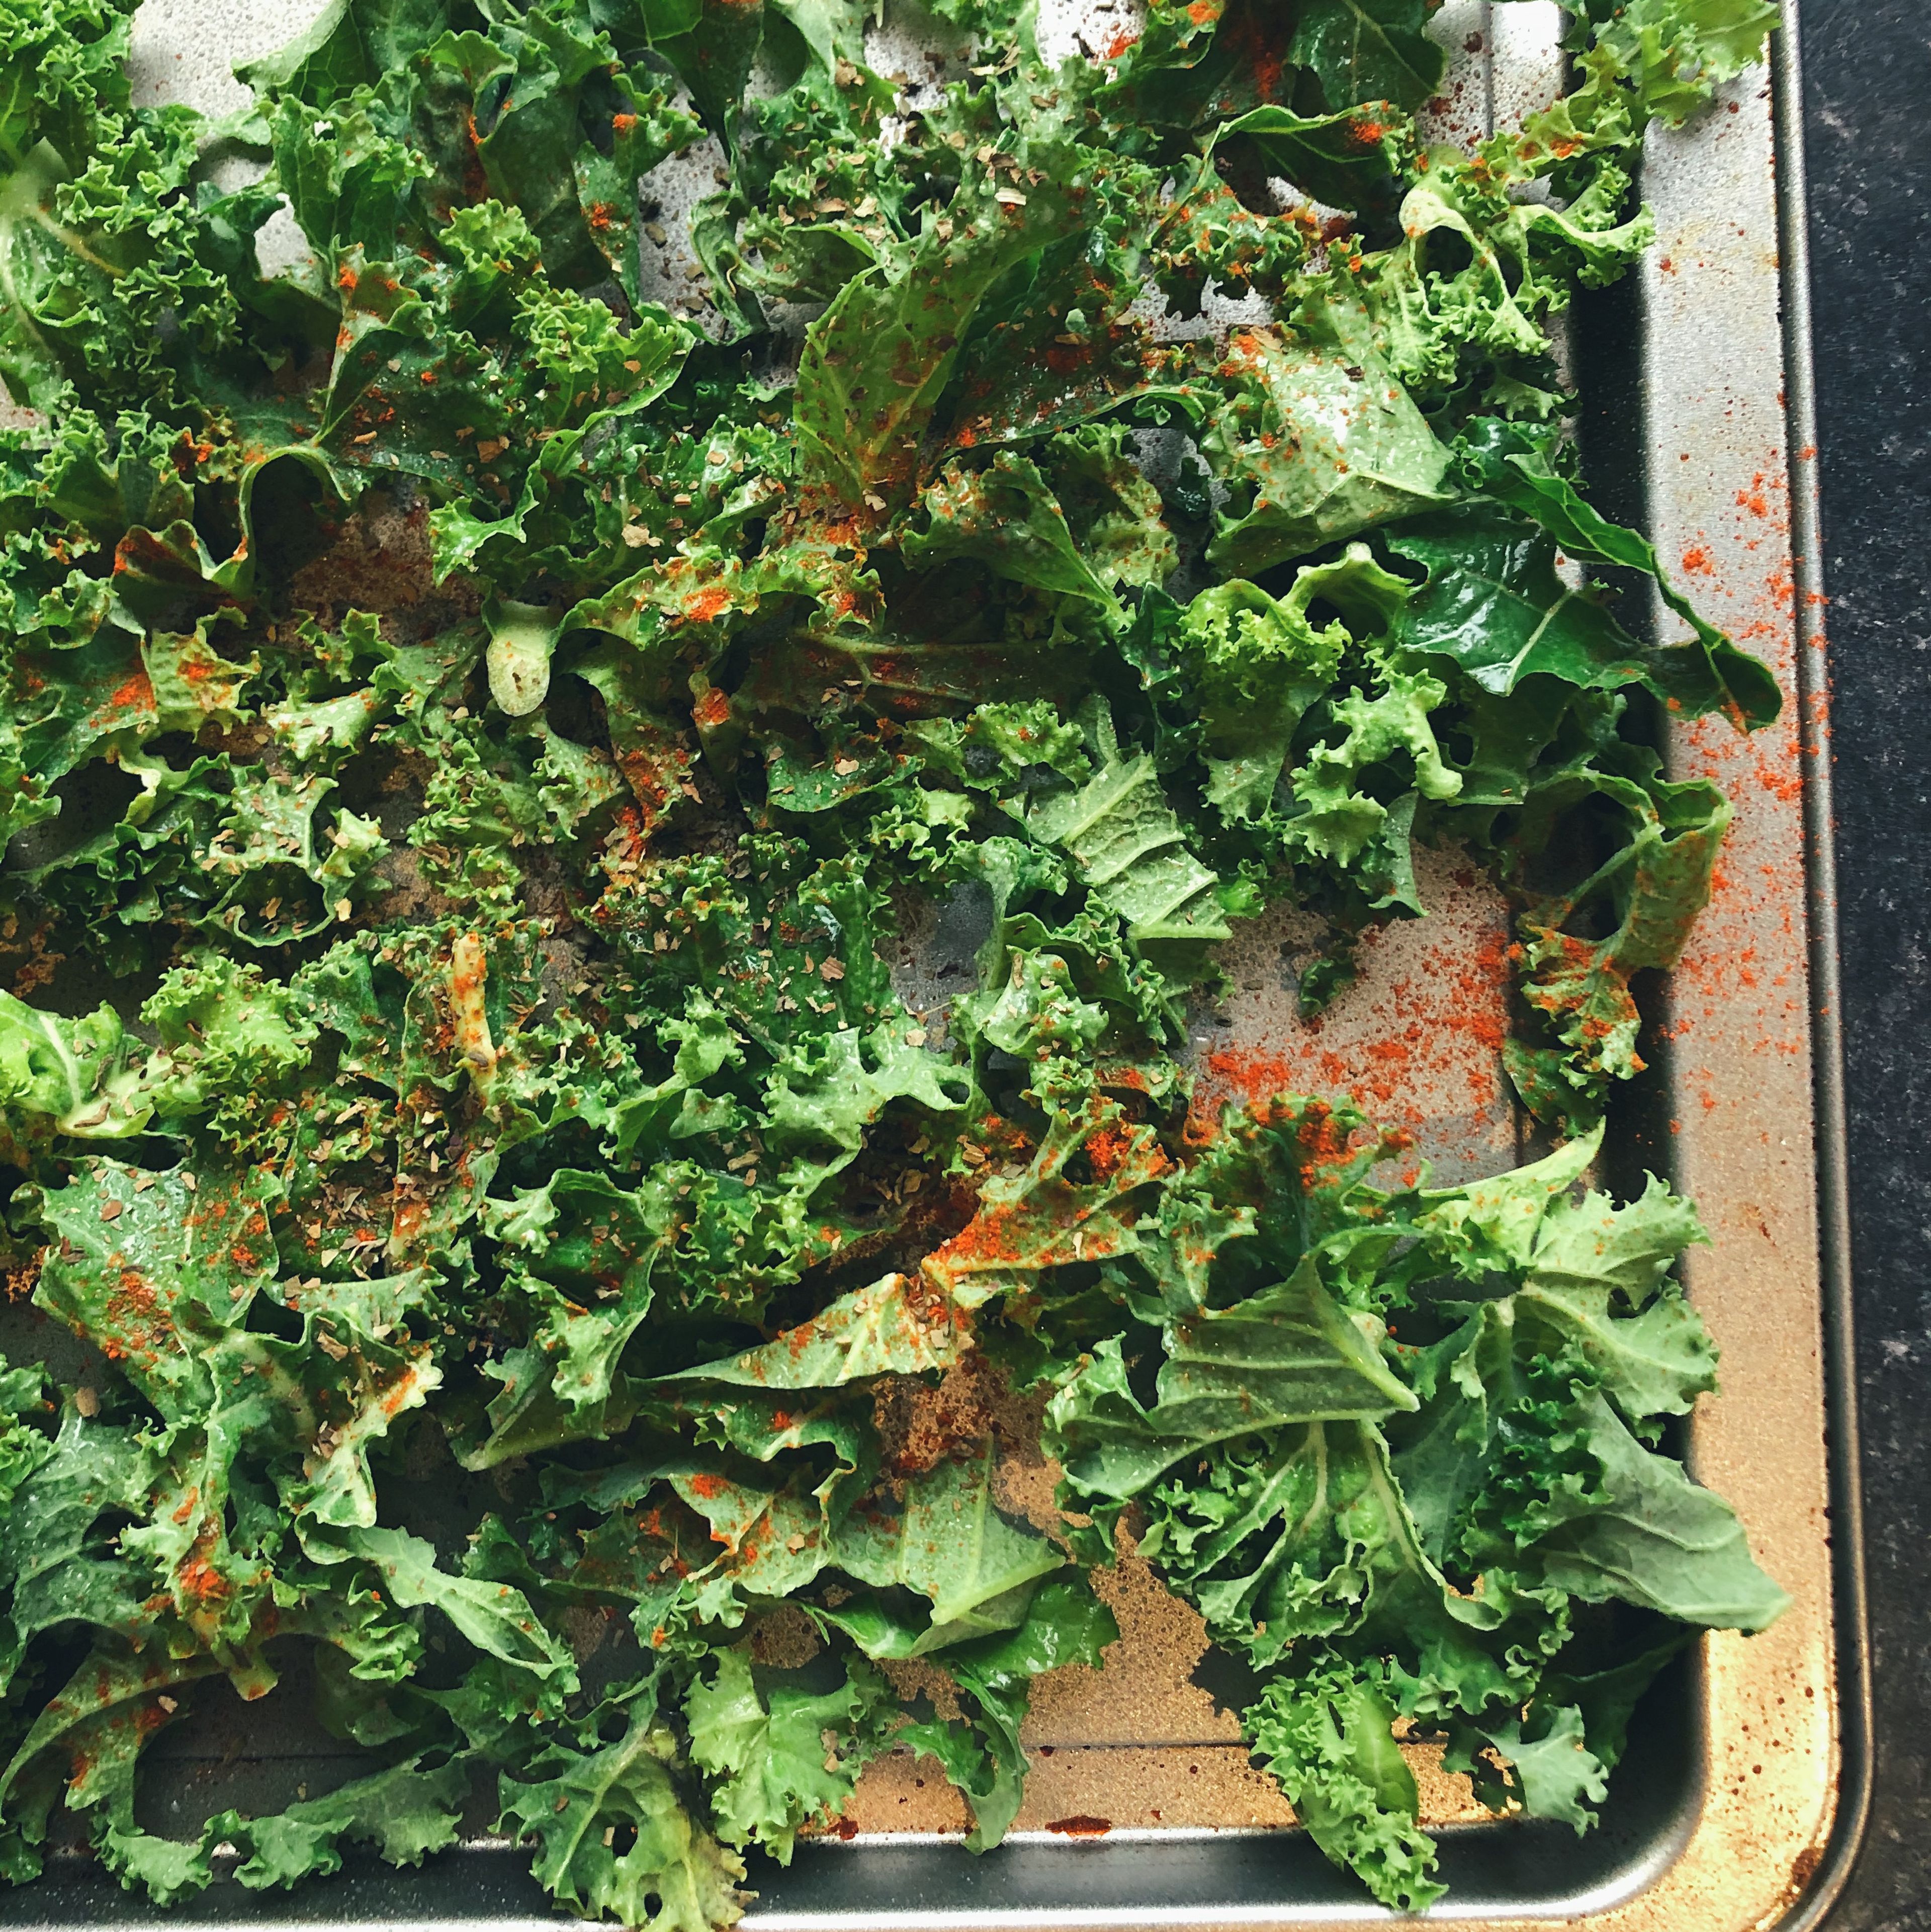 Lay kale on baking tray. Sprinkle basil, paprika, Salt and pepper evenly over the top and cover lightly with olive oil. Bake in oven for 10 minutes at 200 degrees.